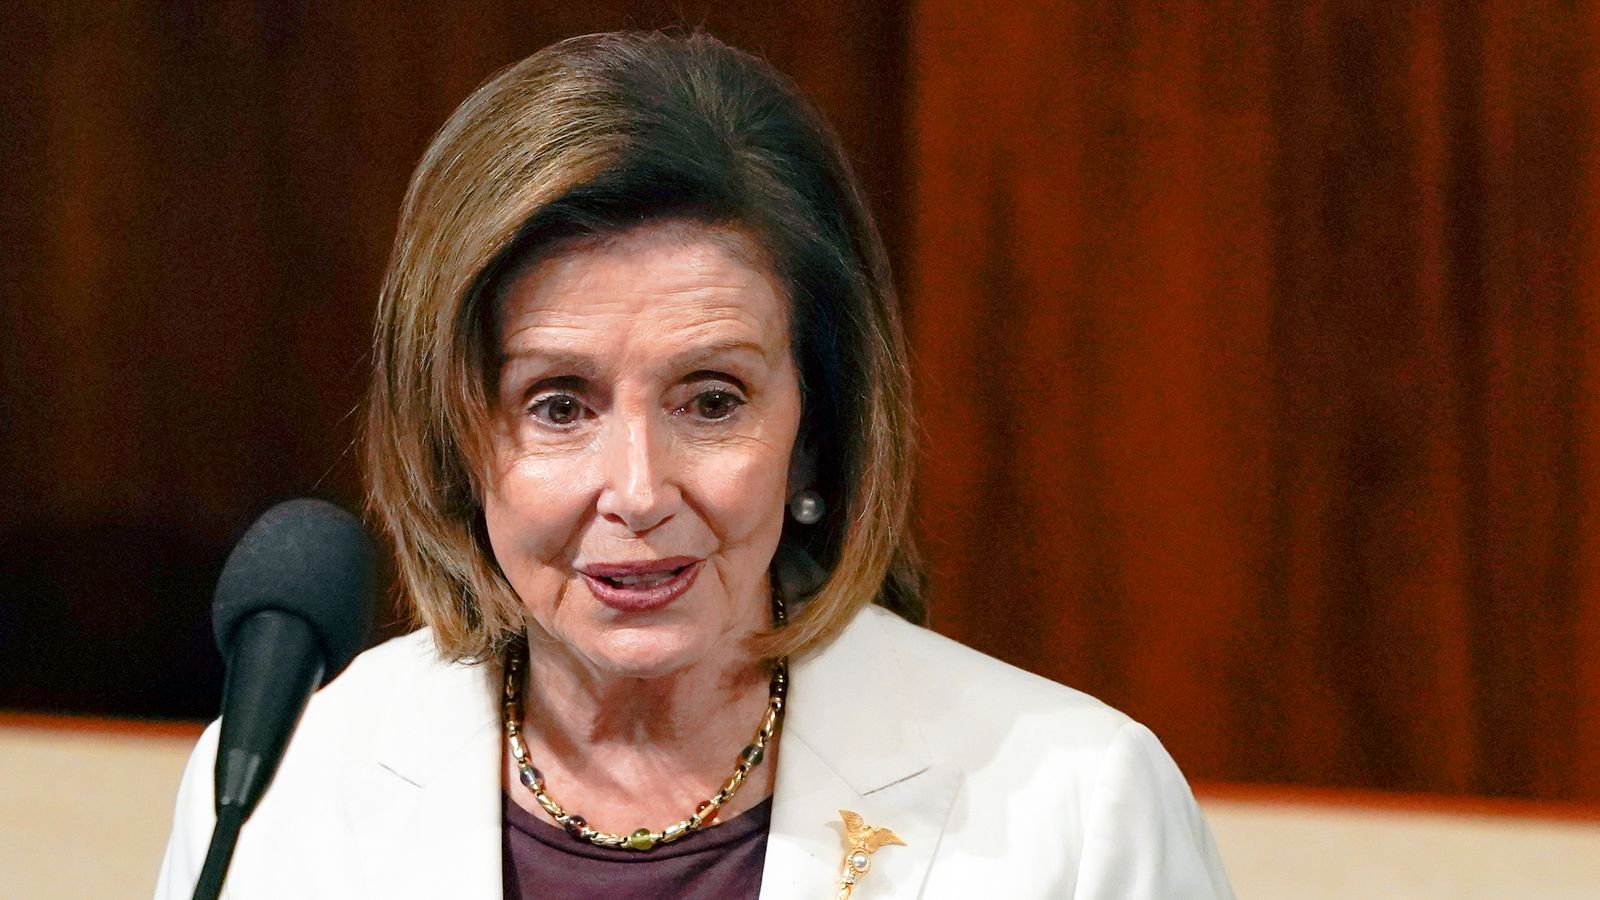 Nancy Pelosi stepping down as Democratic leader in the House